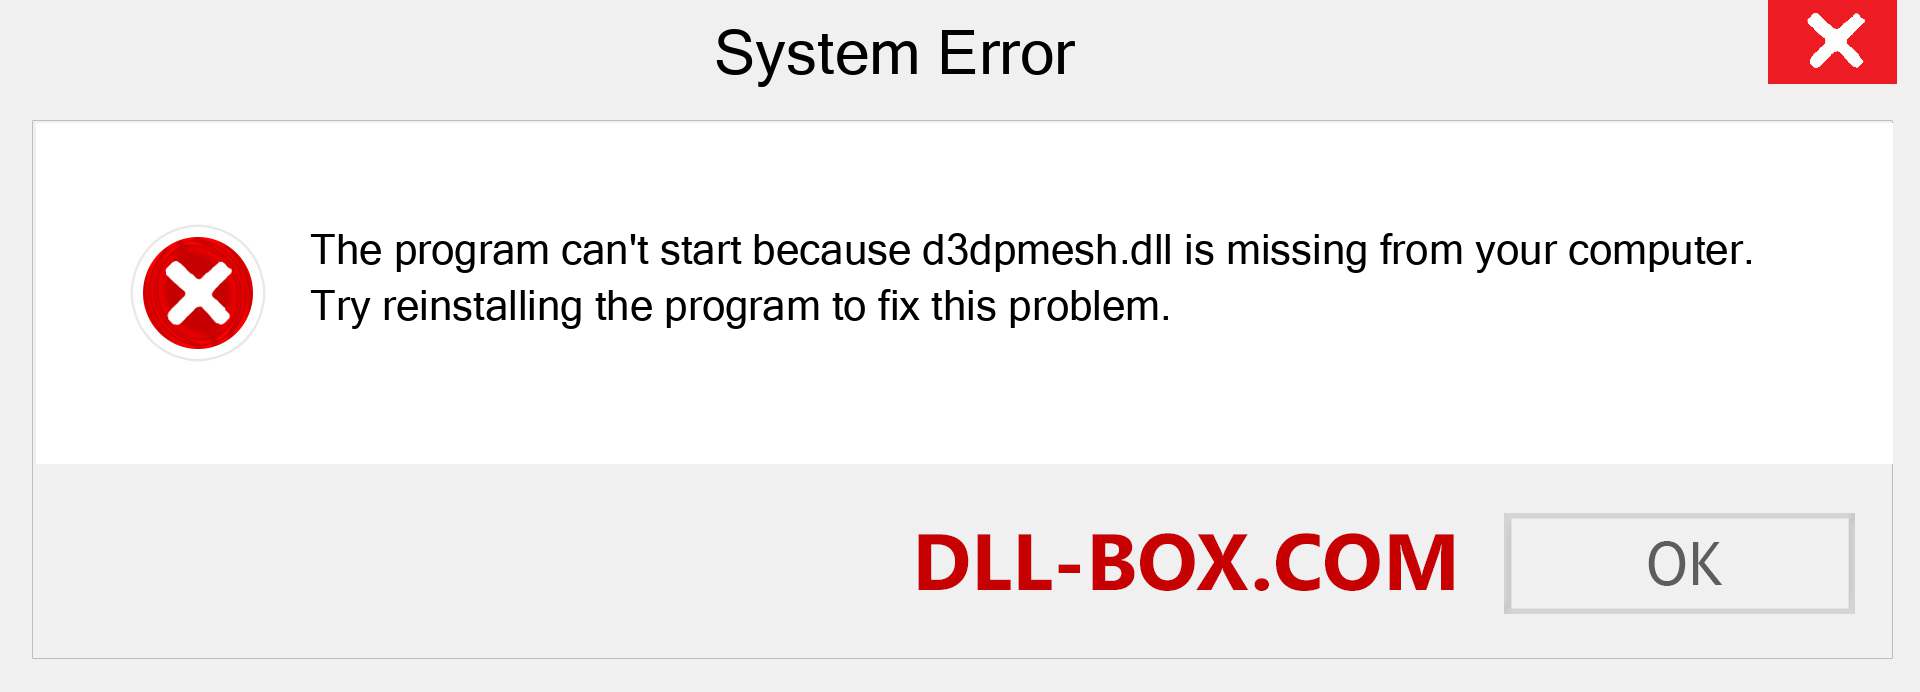  d3dpmesh.dll file is missing?. Download for Windows 7, 8, 10 - Fix  d3dpmesh dll Missing Error on Windows, photos, images